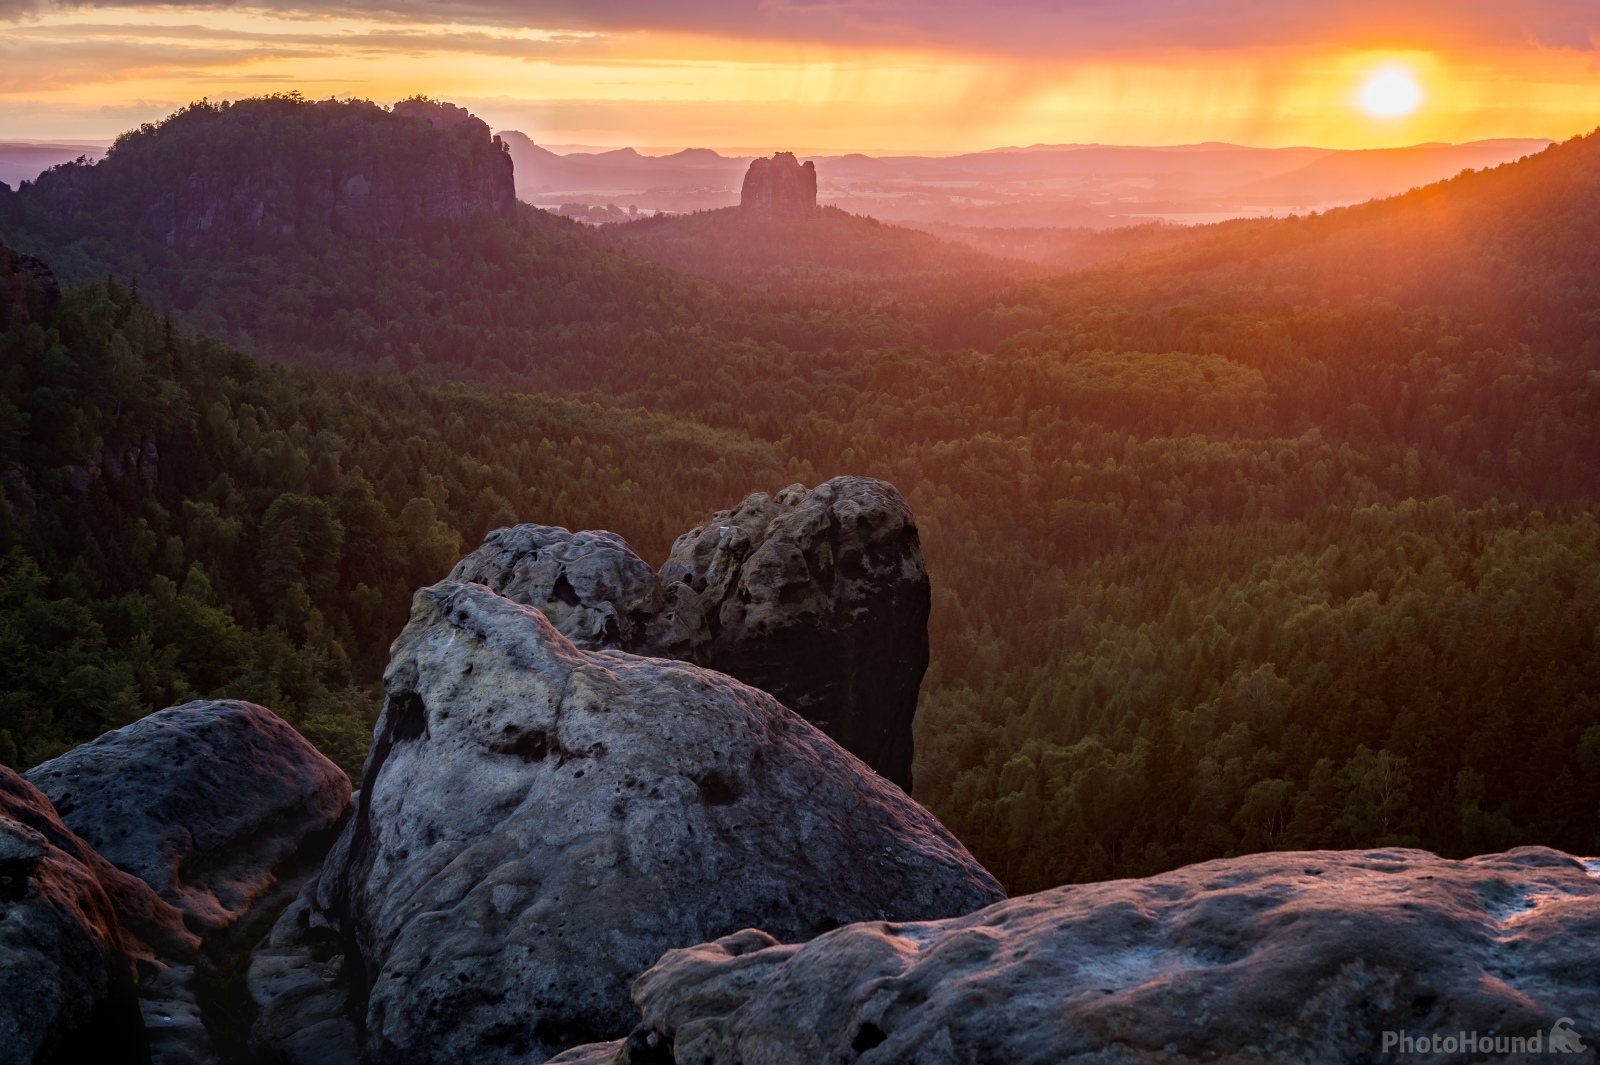 Image of Domerker Viewpoint, Saxon Switzerland National Park by VOJTa Herout